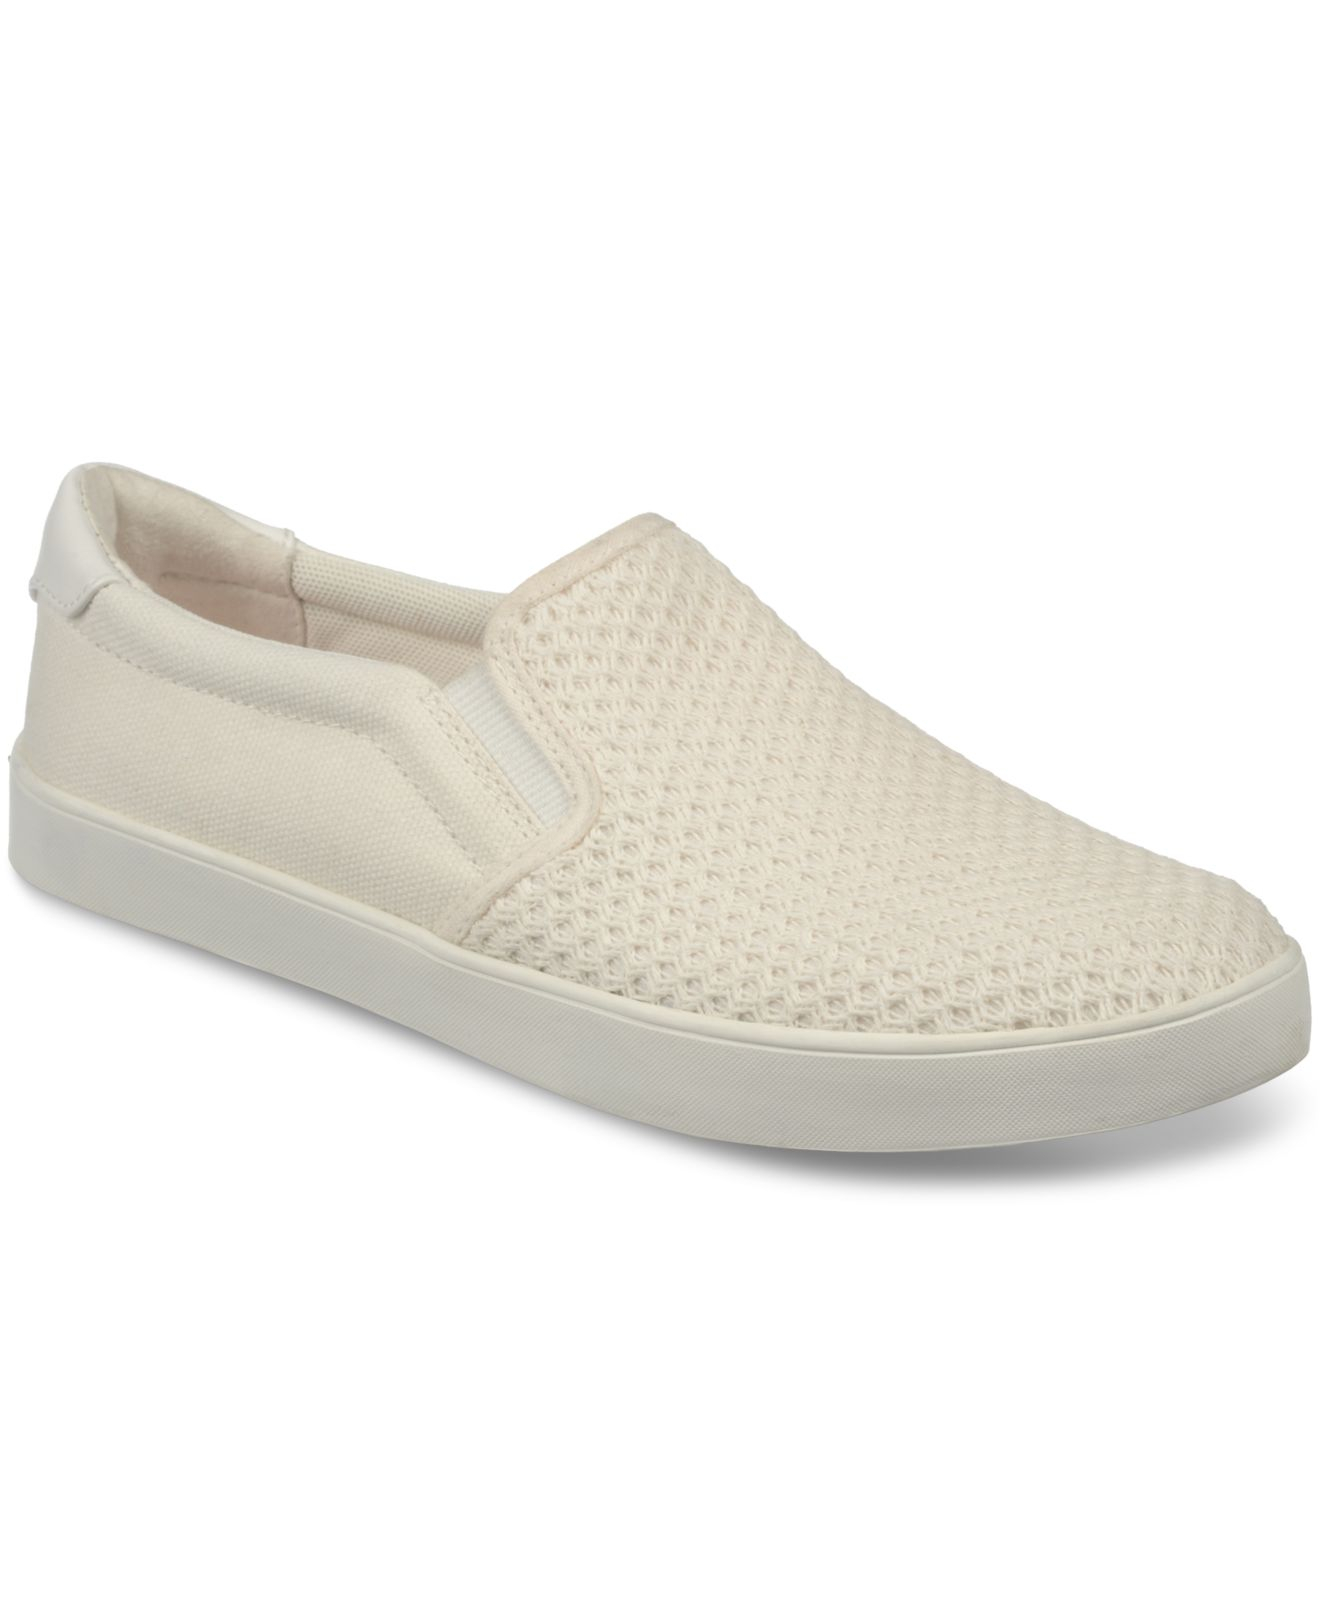 Lyst - Dr. Scholls Madison Sneakers in White